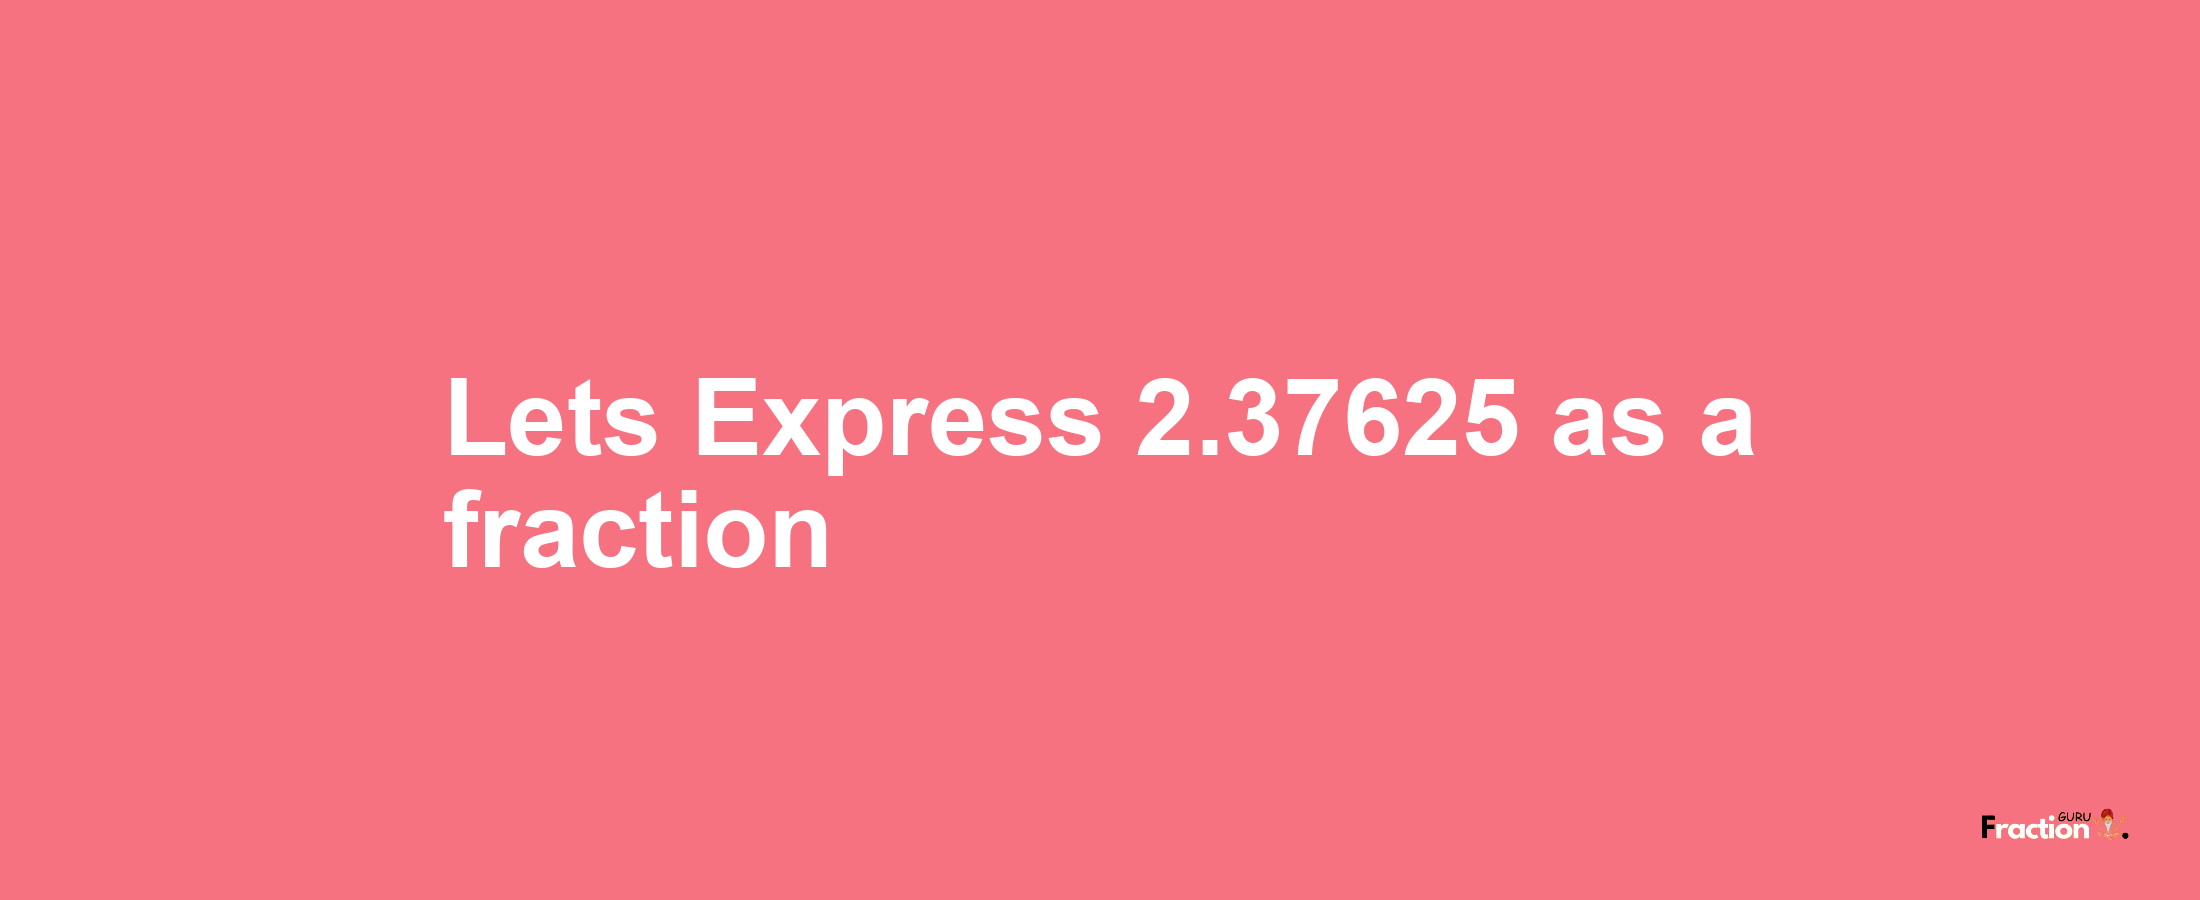 Lets Express 2.37625 as afraction